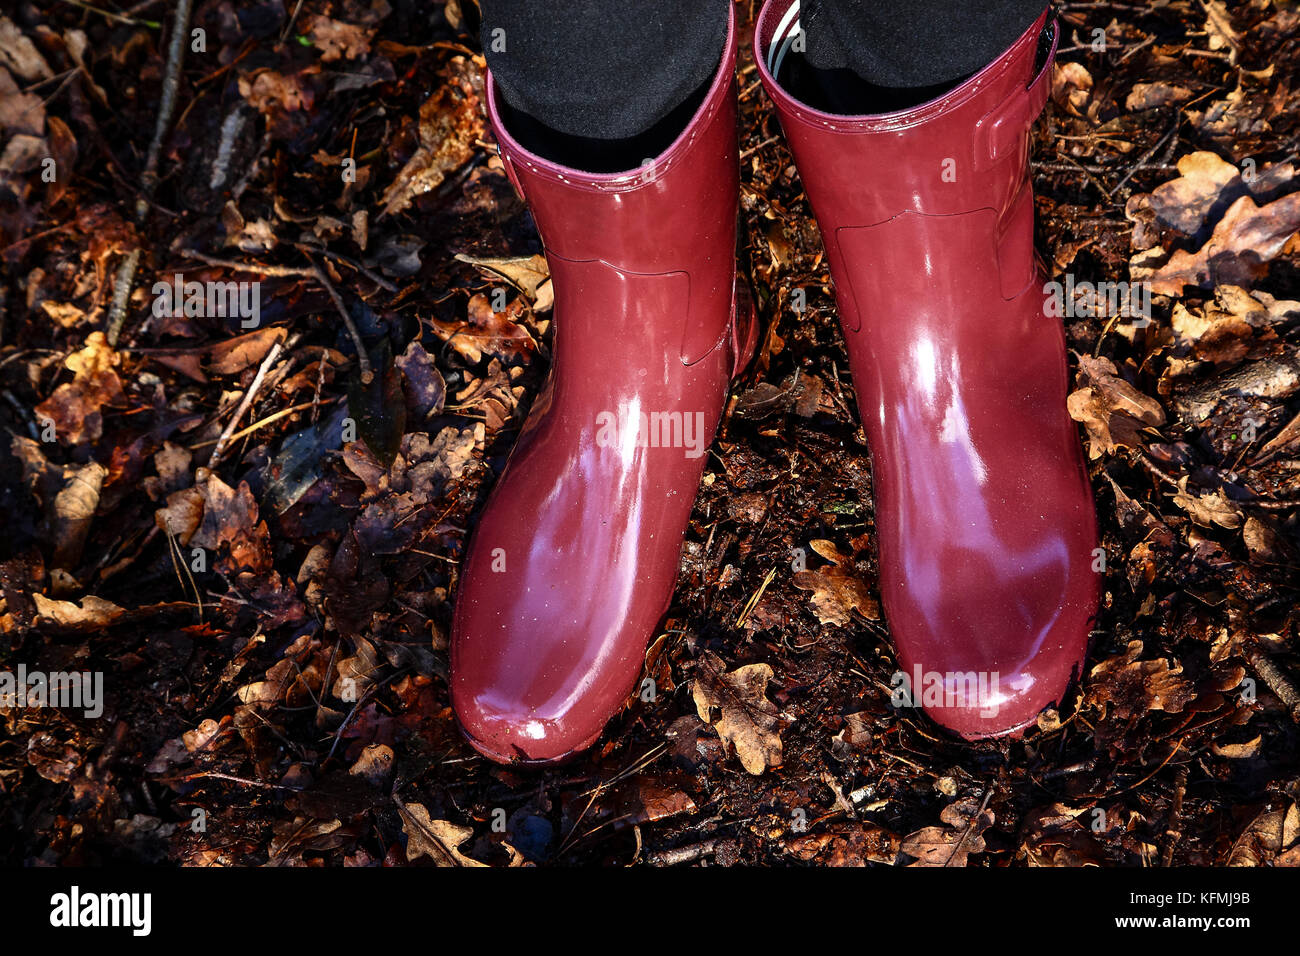 Young woman wearing wellington boots walking amongst fallen autumn leaves in the woods Stock Photo